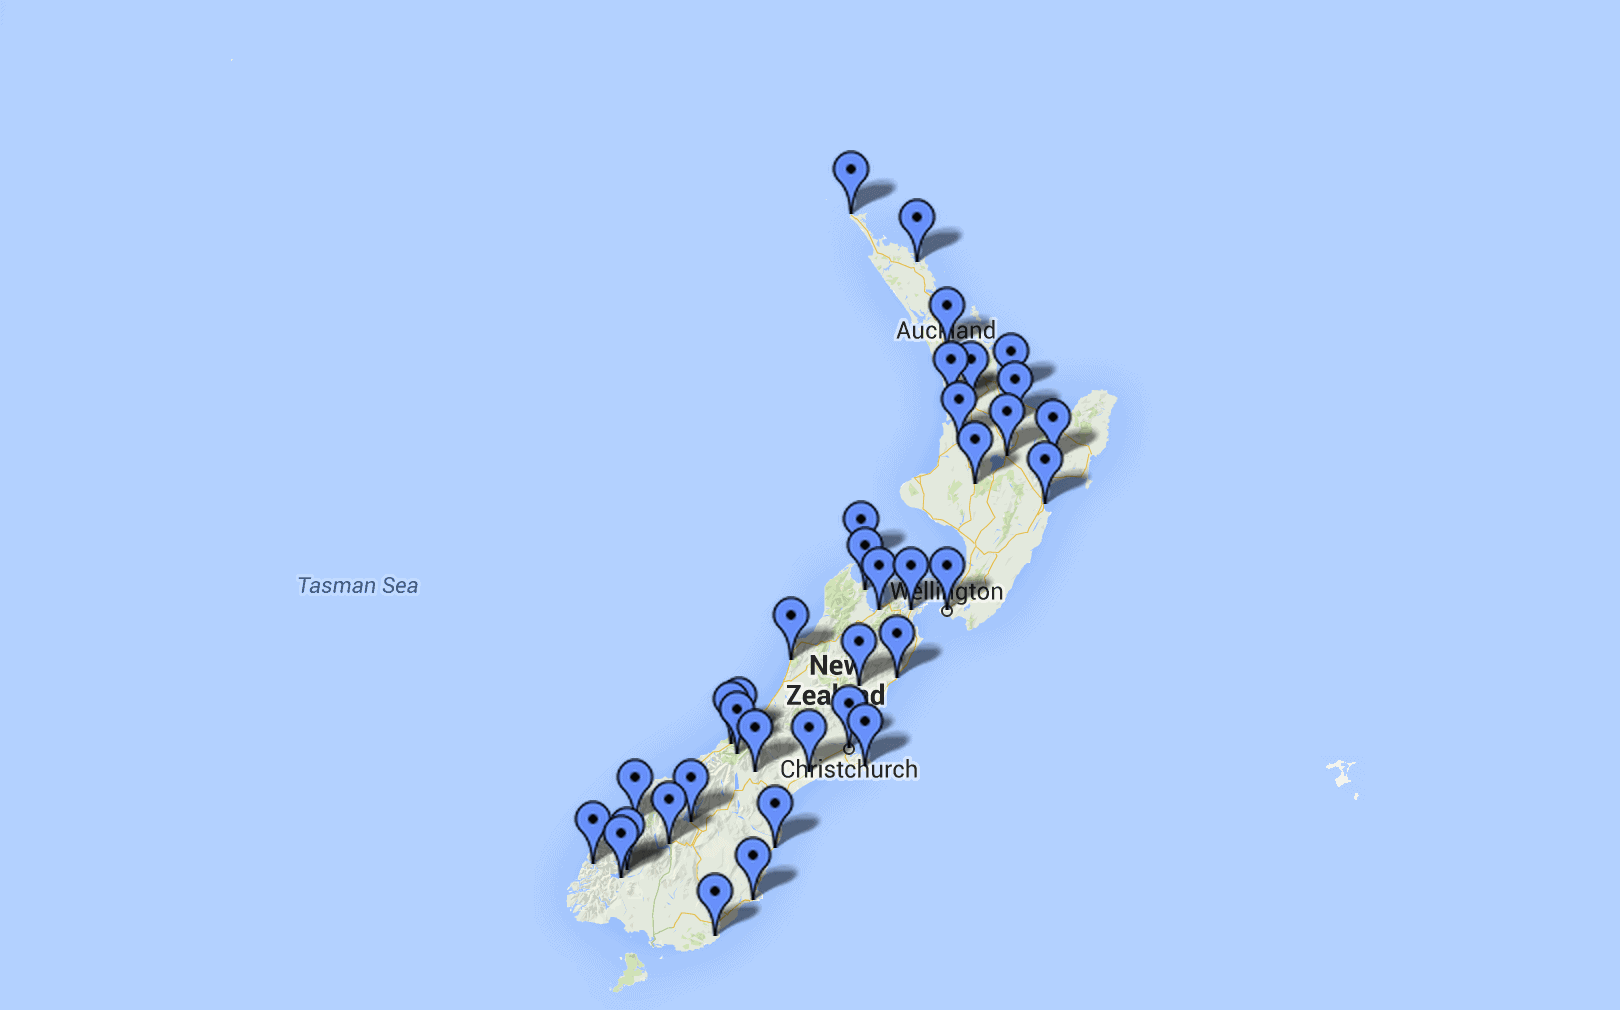 New Zealand route